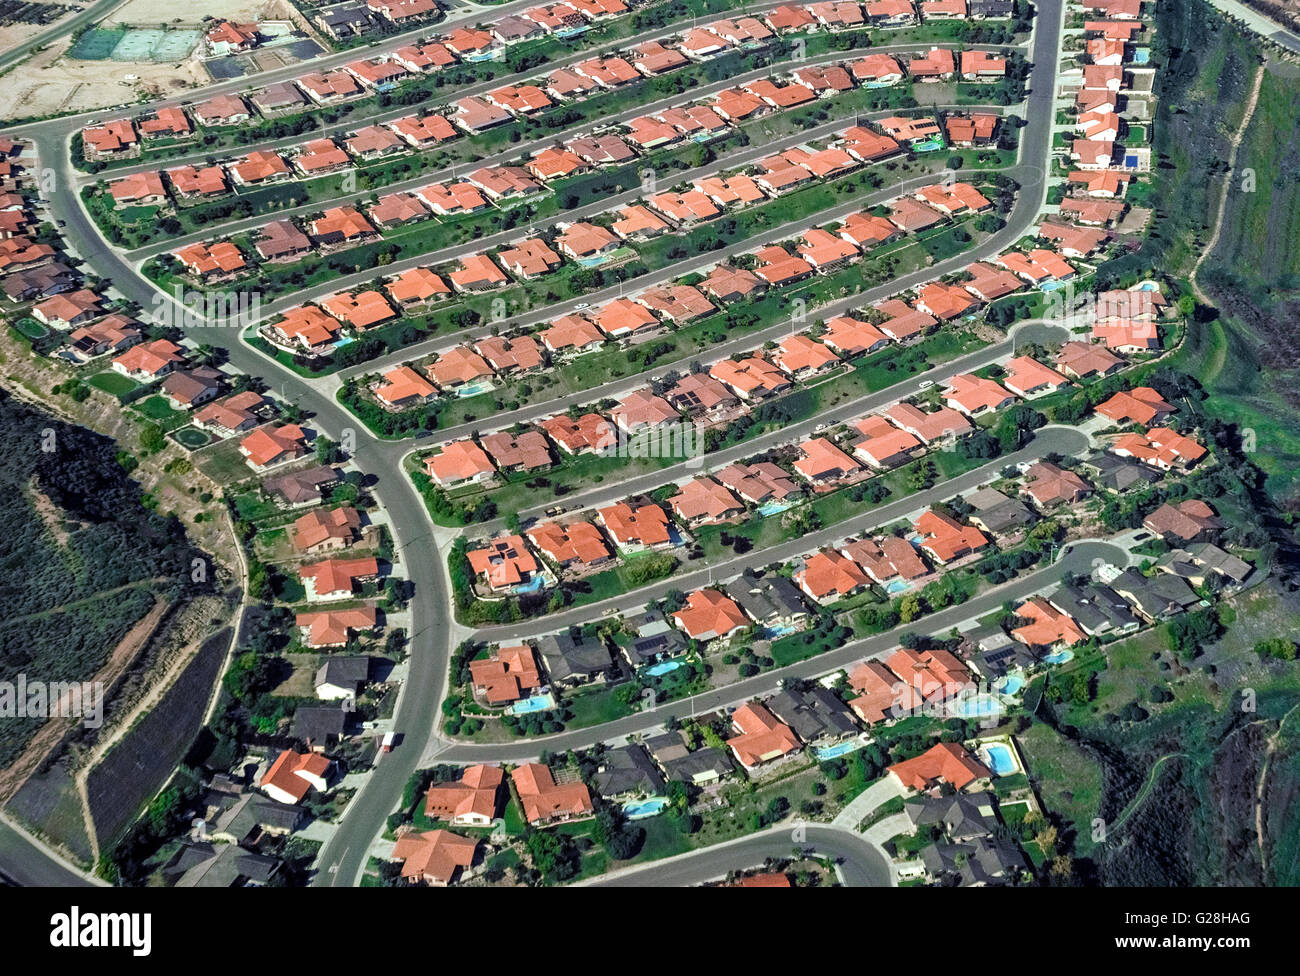 An aerial view shows side-by-side homes with red-tile roofs that are crammed into this housing development among foothills in San Diego County in Southern California, USA. Such jam-packed suburban neighborhoods are common there because of the popularity of that southernmost county in the state and the area's exceptionally pleasant weather. Stock Photo